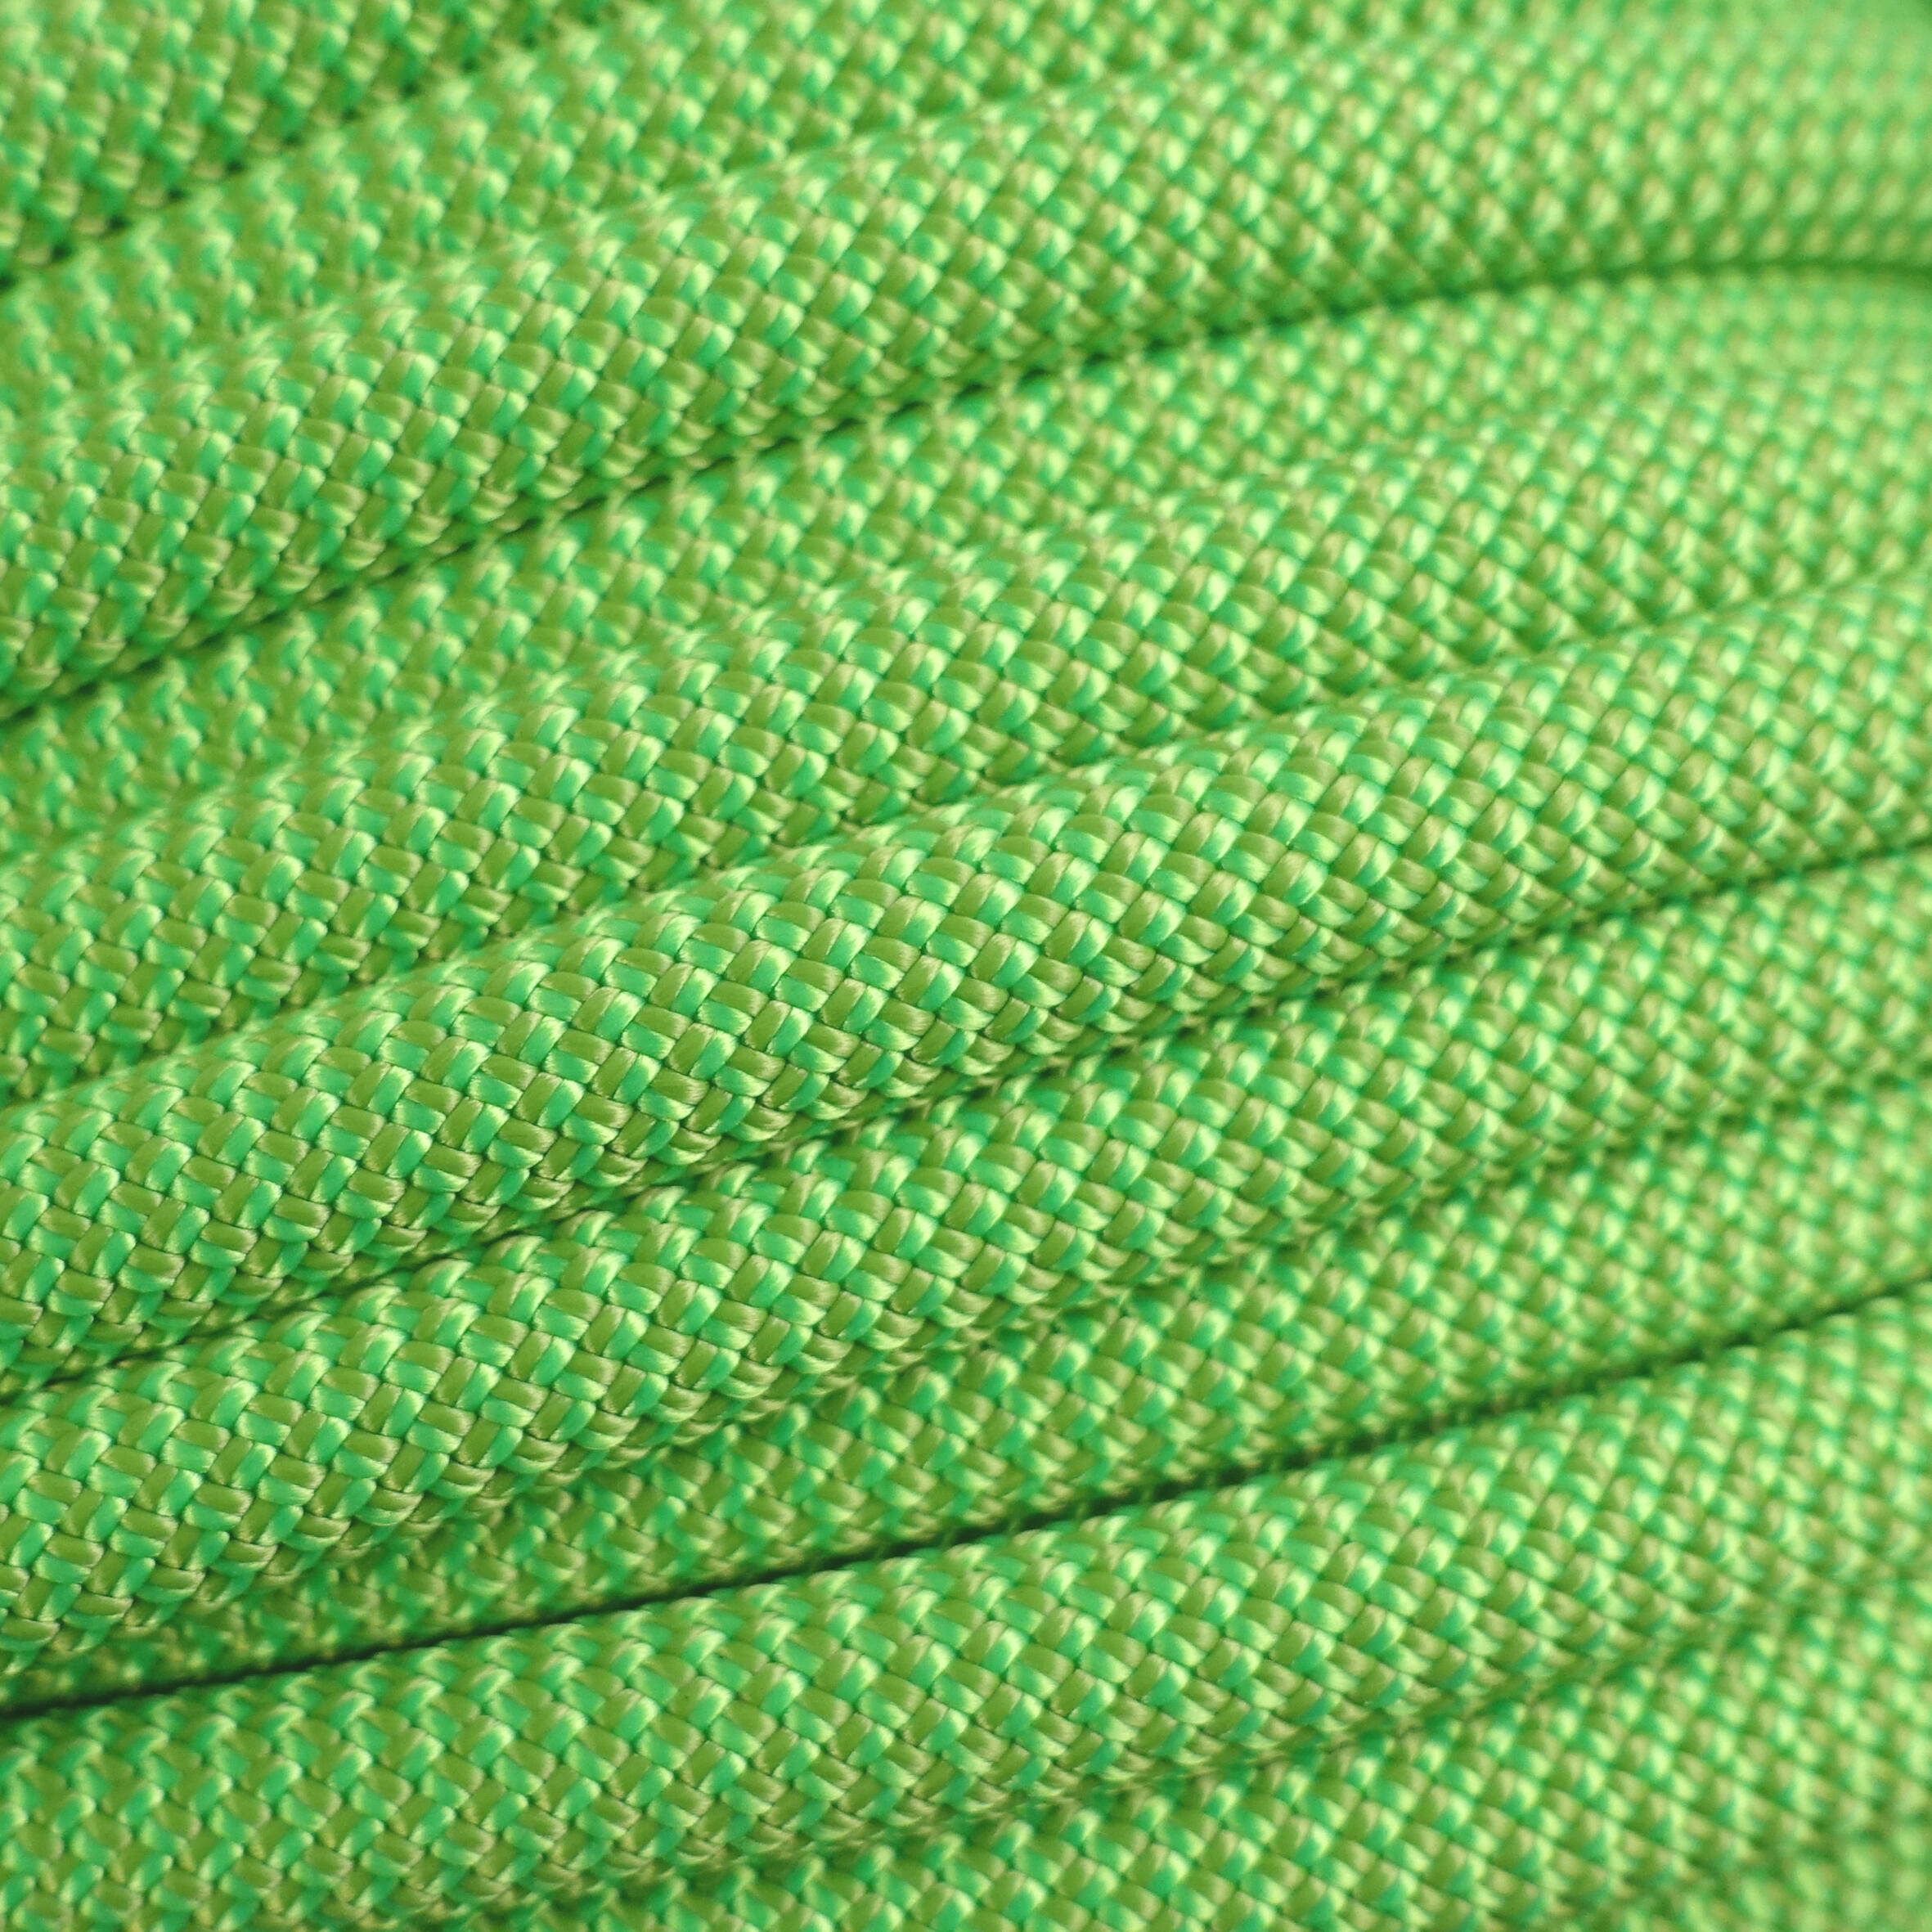 SIMOND Cliff Climbing Rope 9.5 mm by the Metre - Green (100 m Reel)